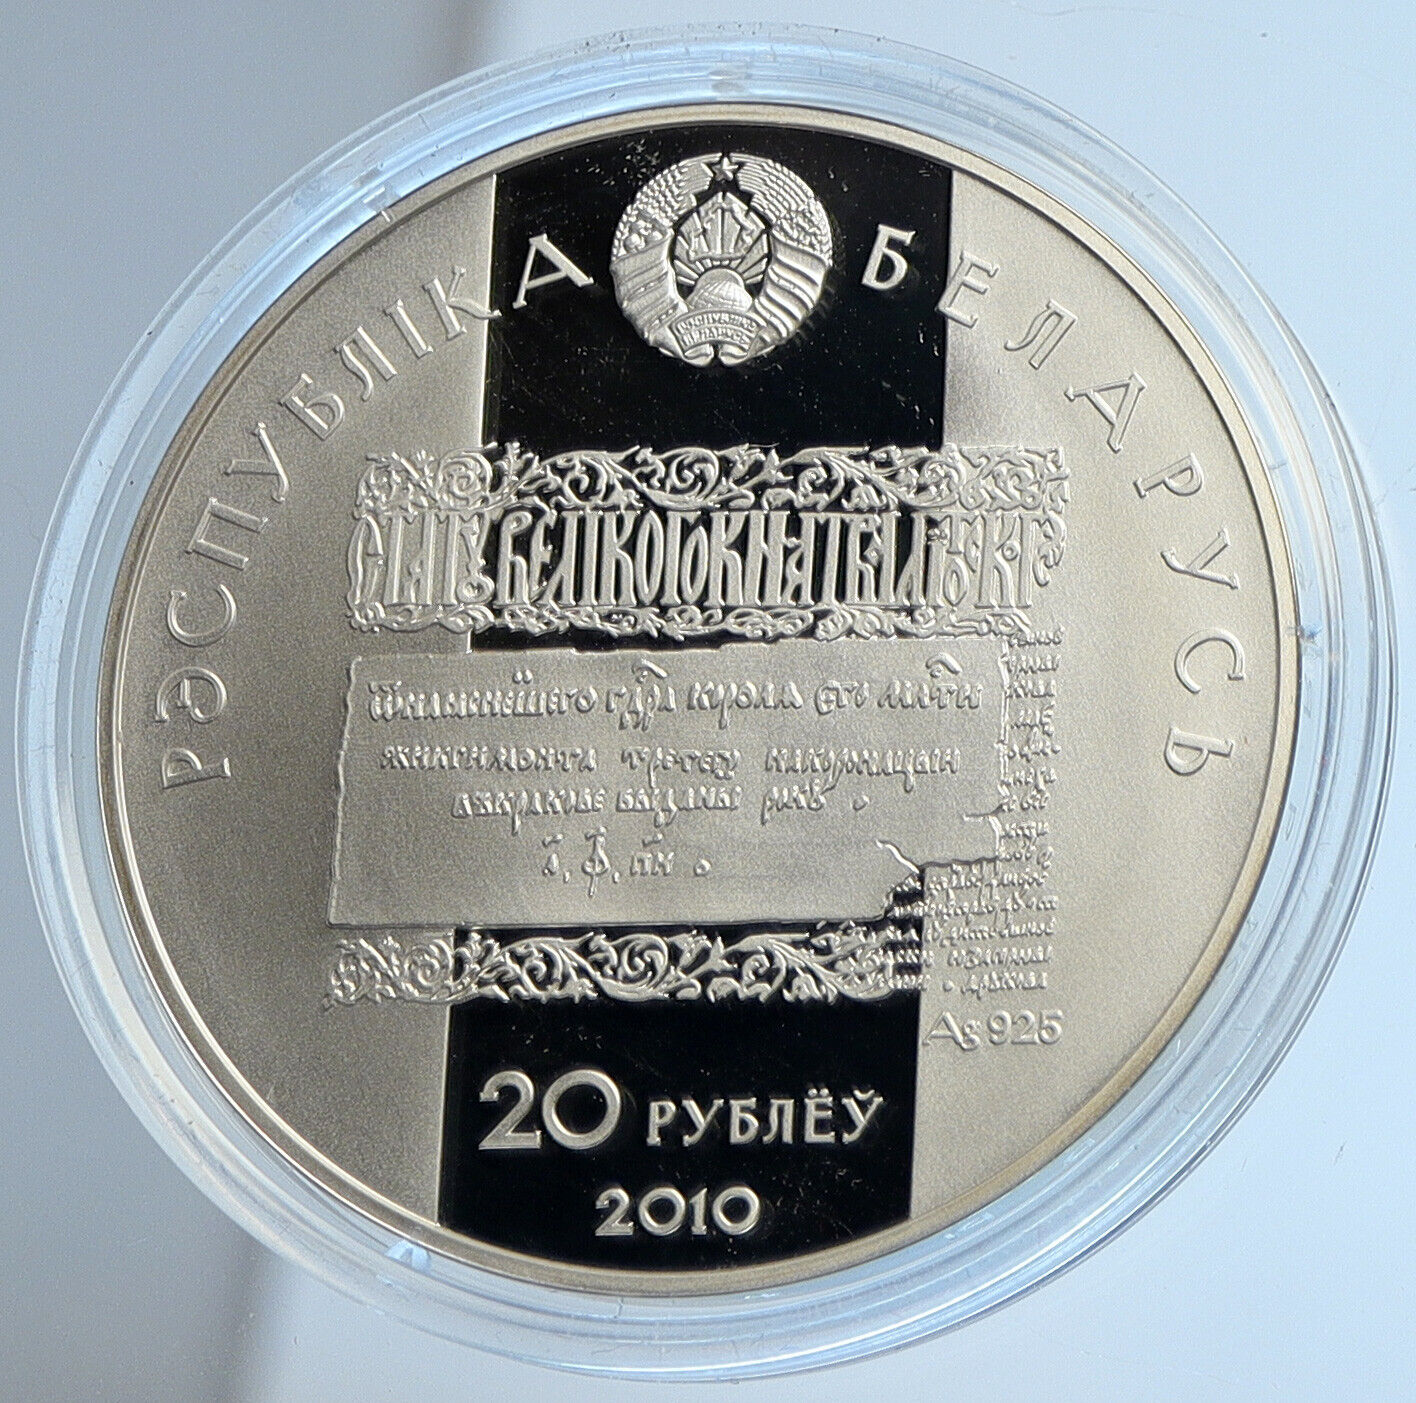 2010 BELARUS Ley Sapega Chancellor DEFENDERS Proof Silver 20 Rouble Coin i112915